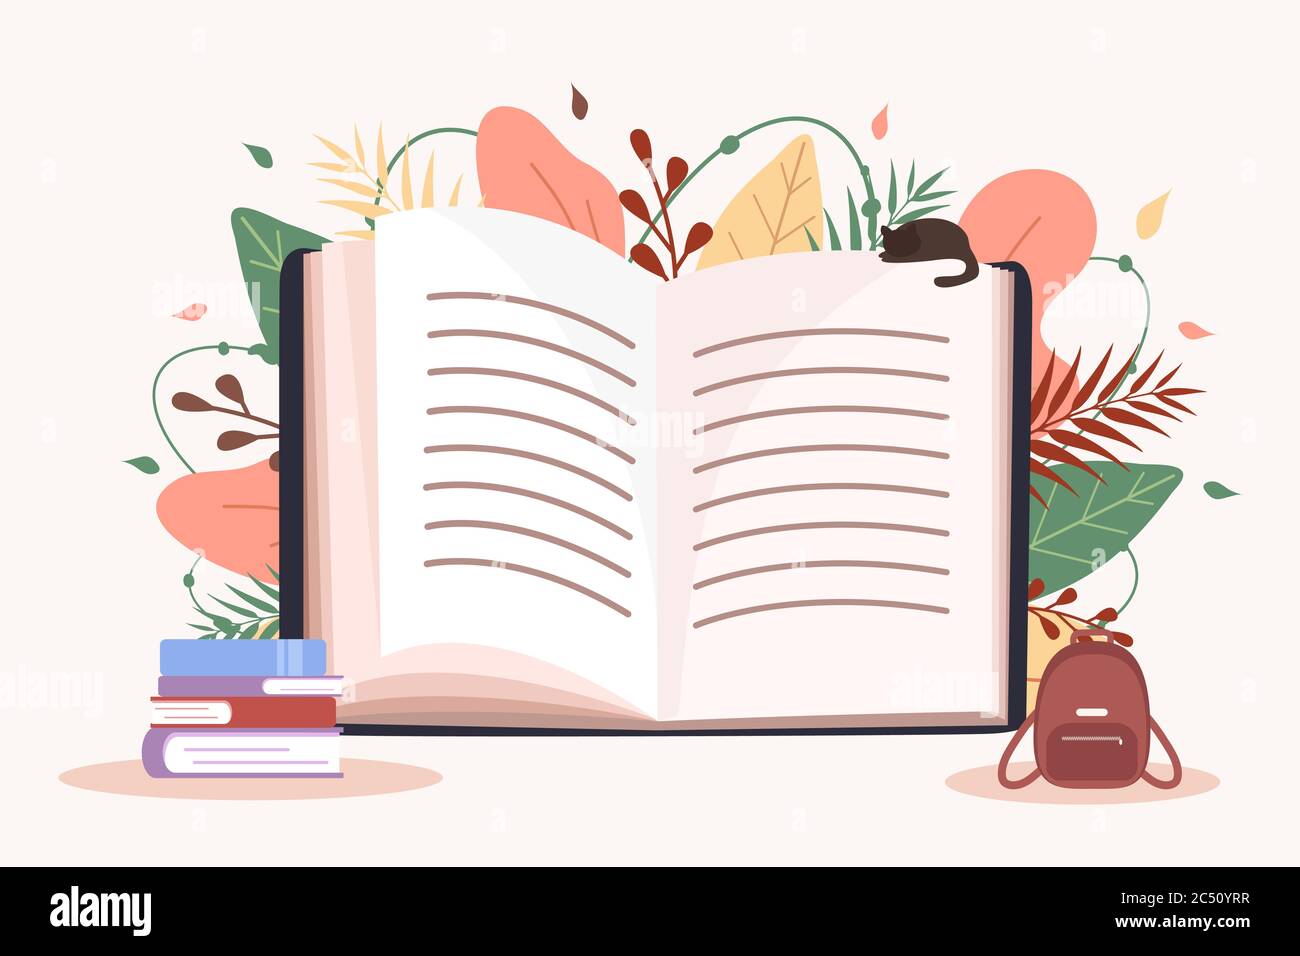 Open book. Education and reading concept. Book festival. Back to school. Modern vector illustration in flat style. Stock Vector